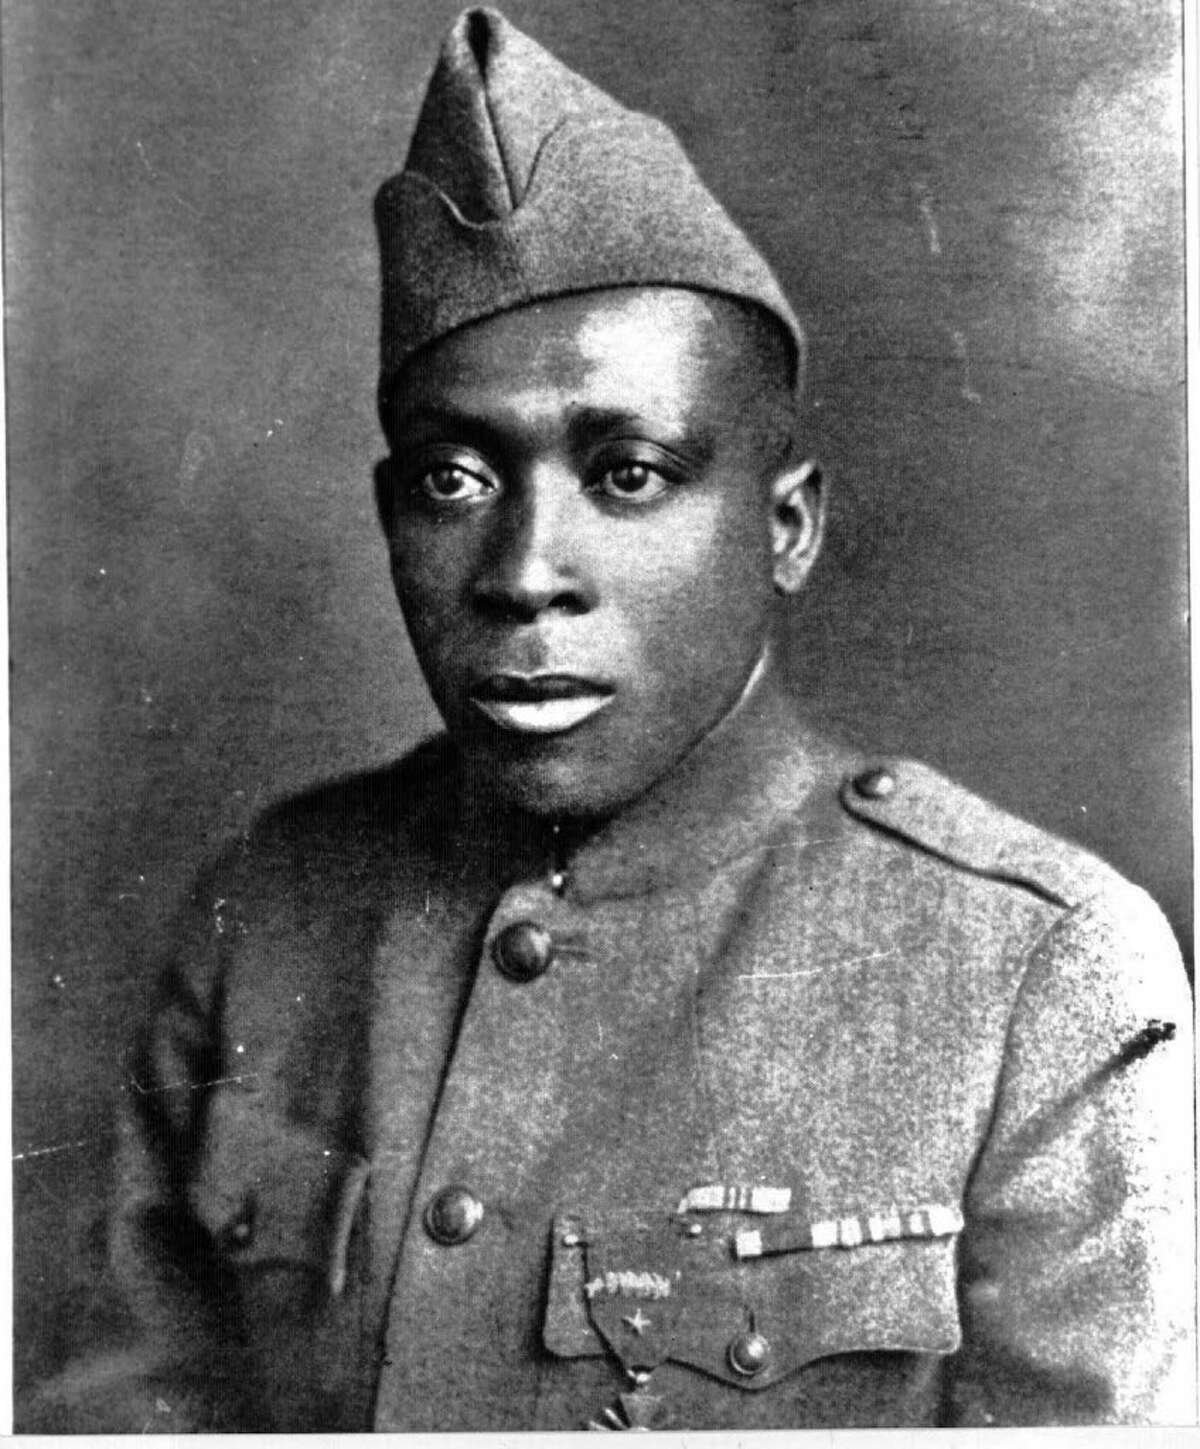 This undated photo provided by the U.S. Army shows Army Pvt. Henry Johnson. Pvt. Johnson was one of two World War I Army heroes who finally received the Medal of Honor they may have been denied because of discrimination, nearly 100 years after bravely rescuing comrades on the battlefields of France. (U.S. Army via AP)